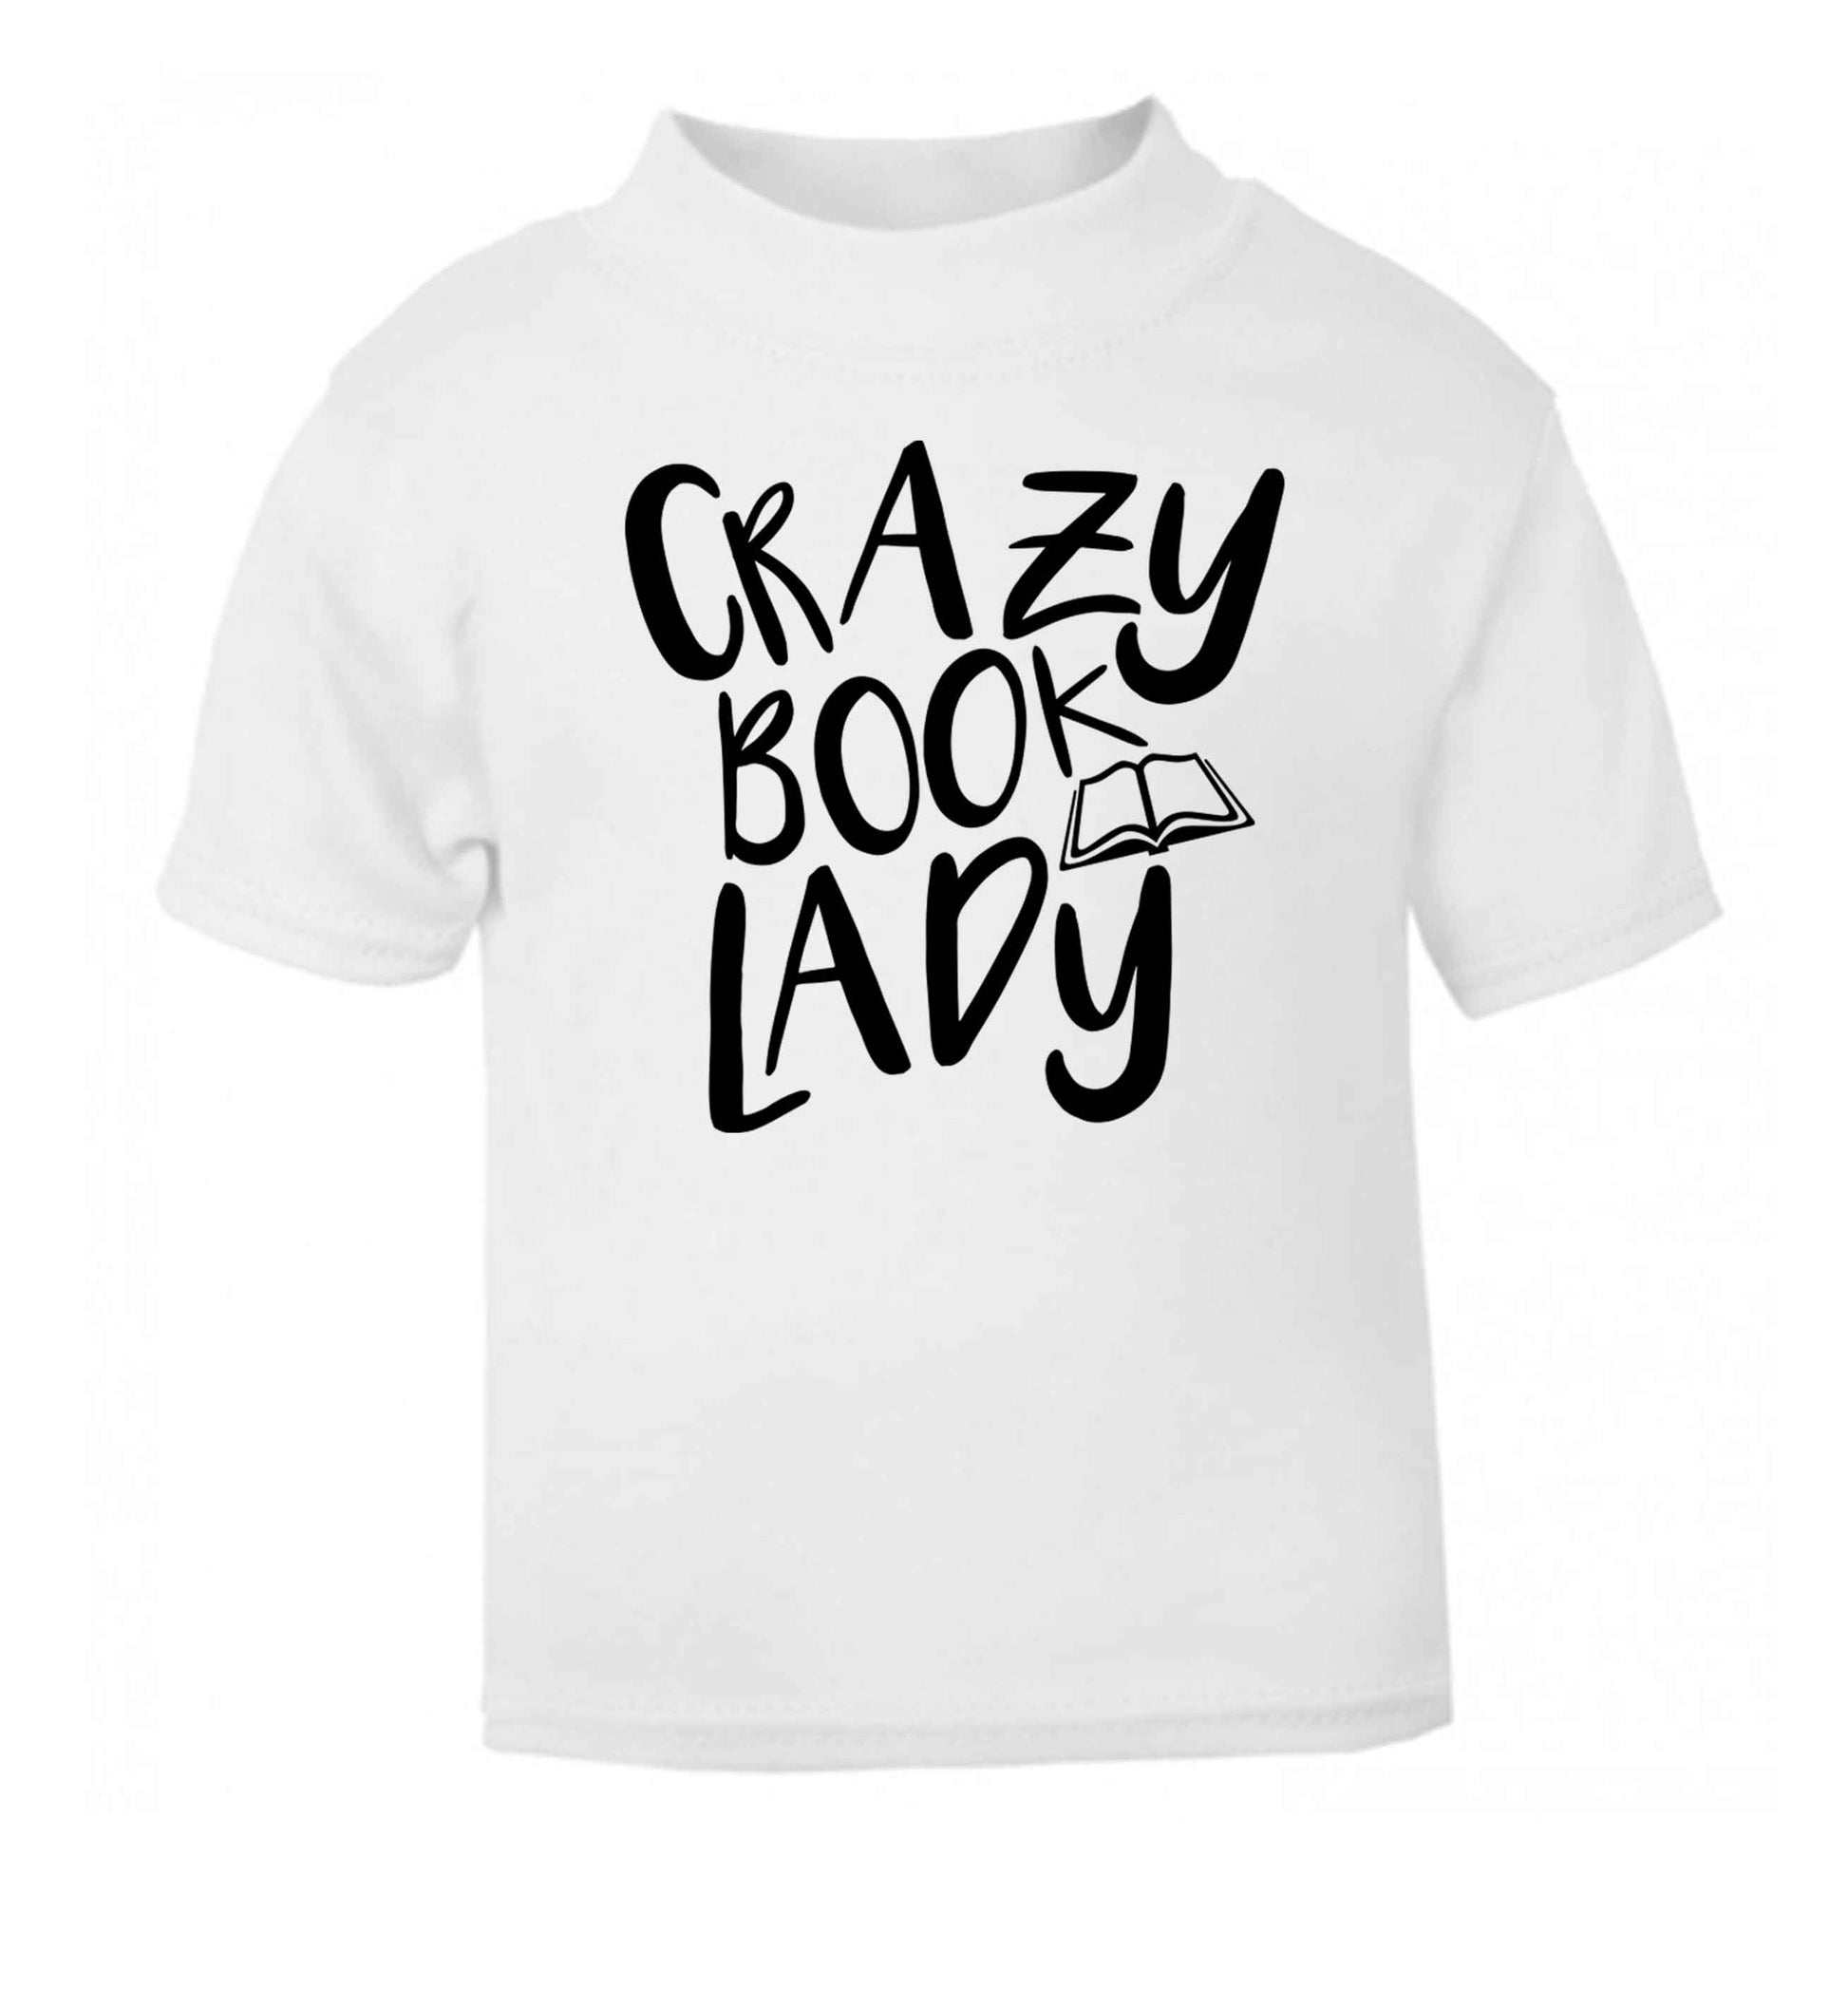 Crazy book lady white Baby Toddler Tshirt 2 Years